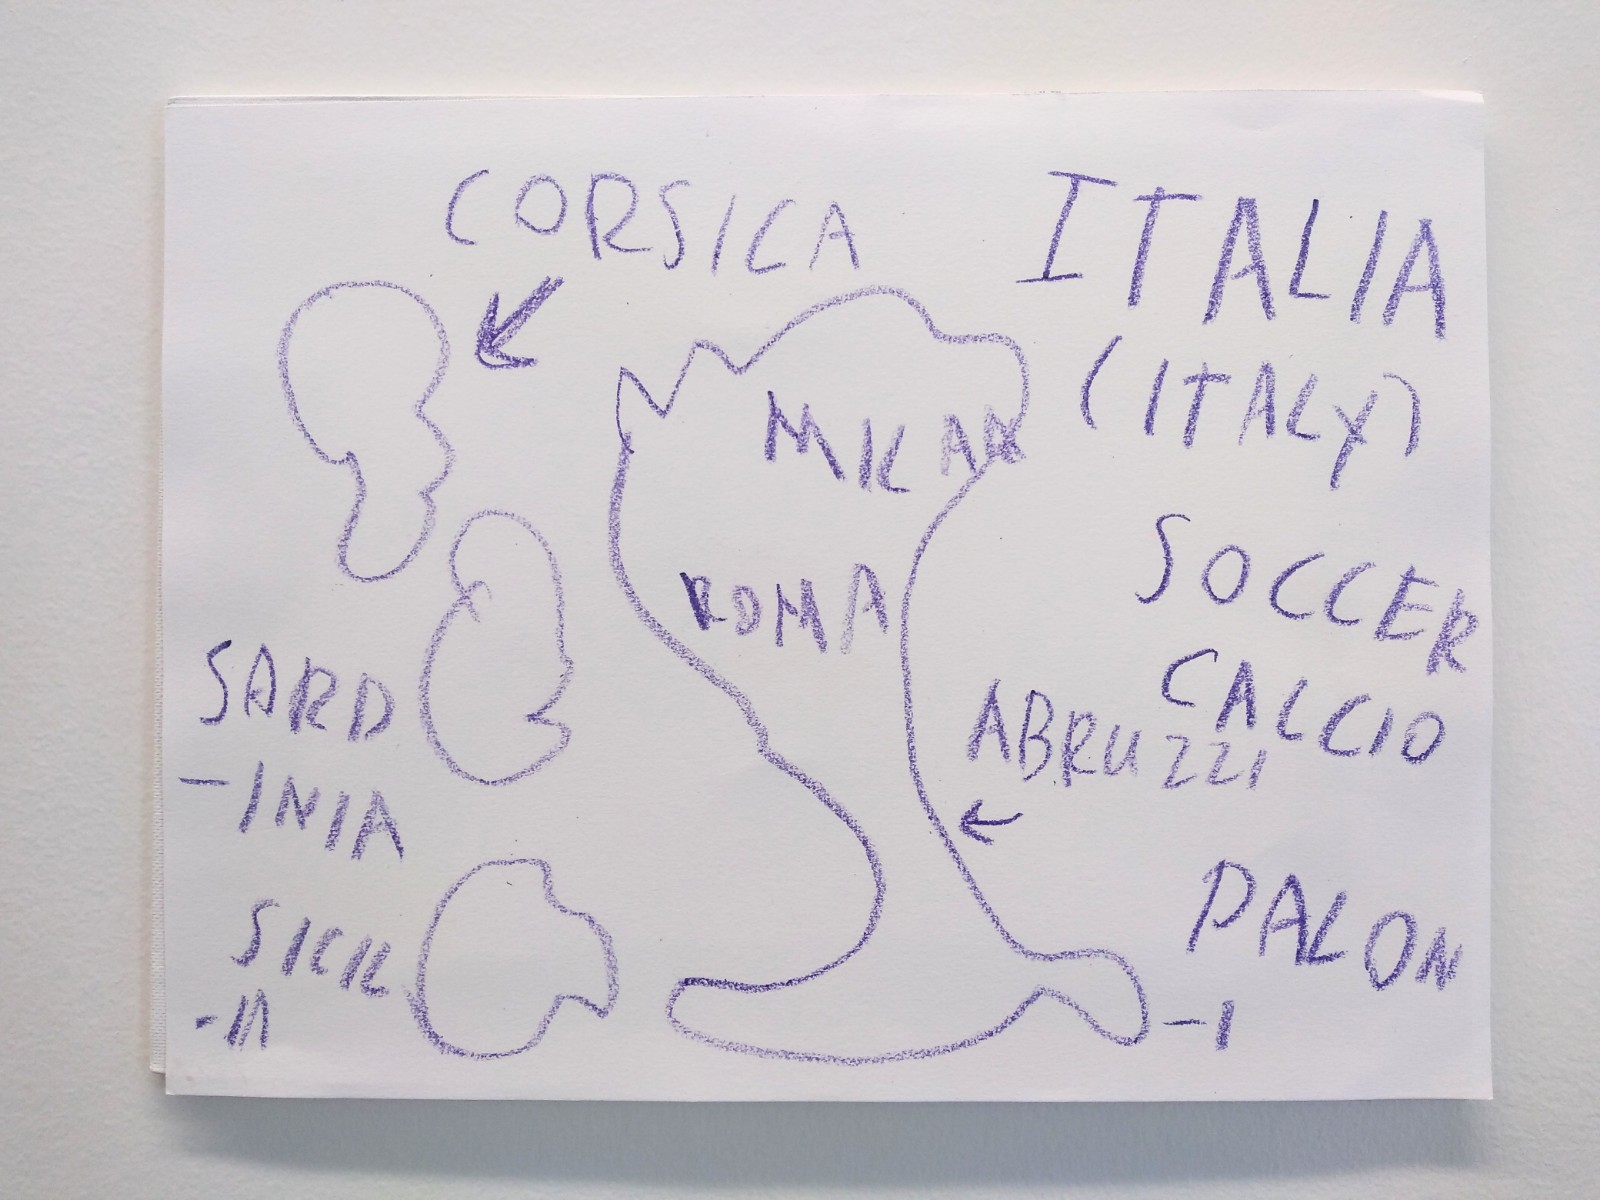 Hand drawn map of Italy.